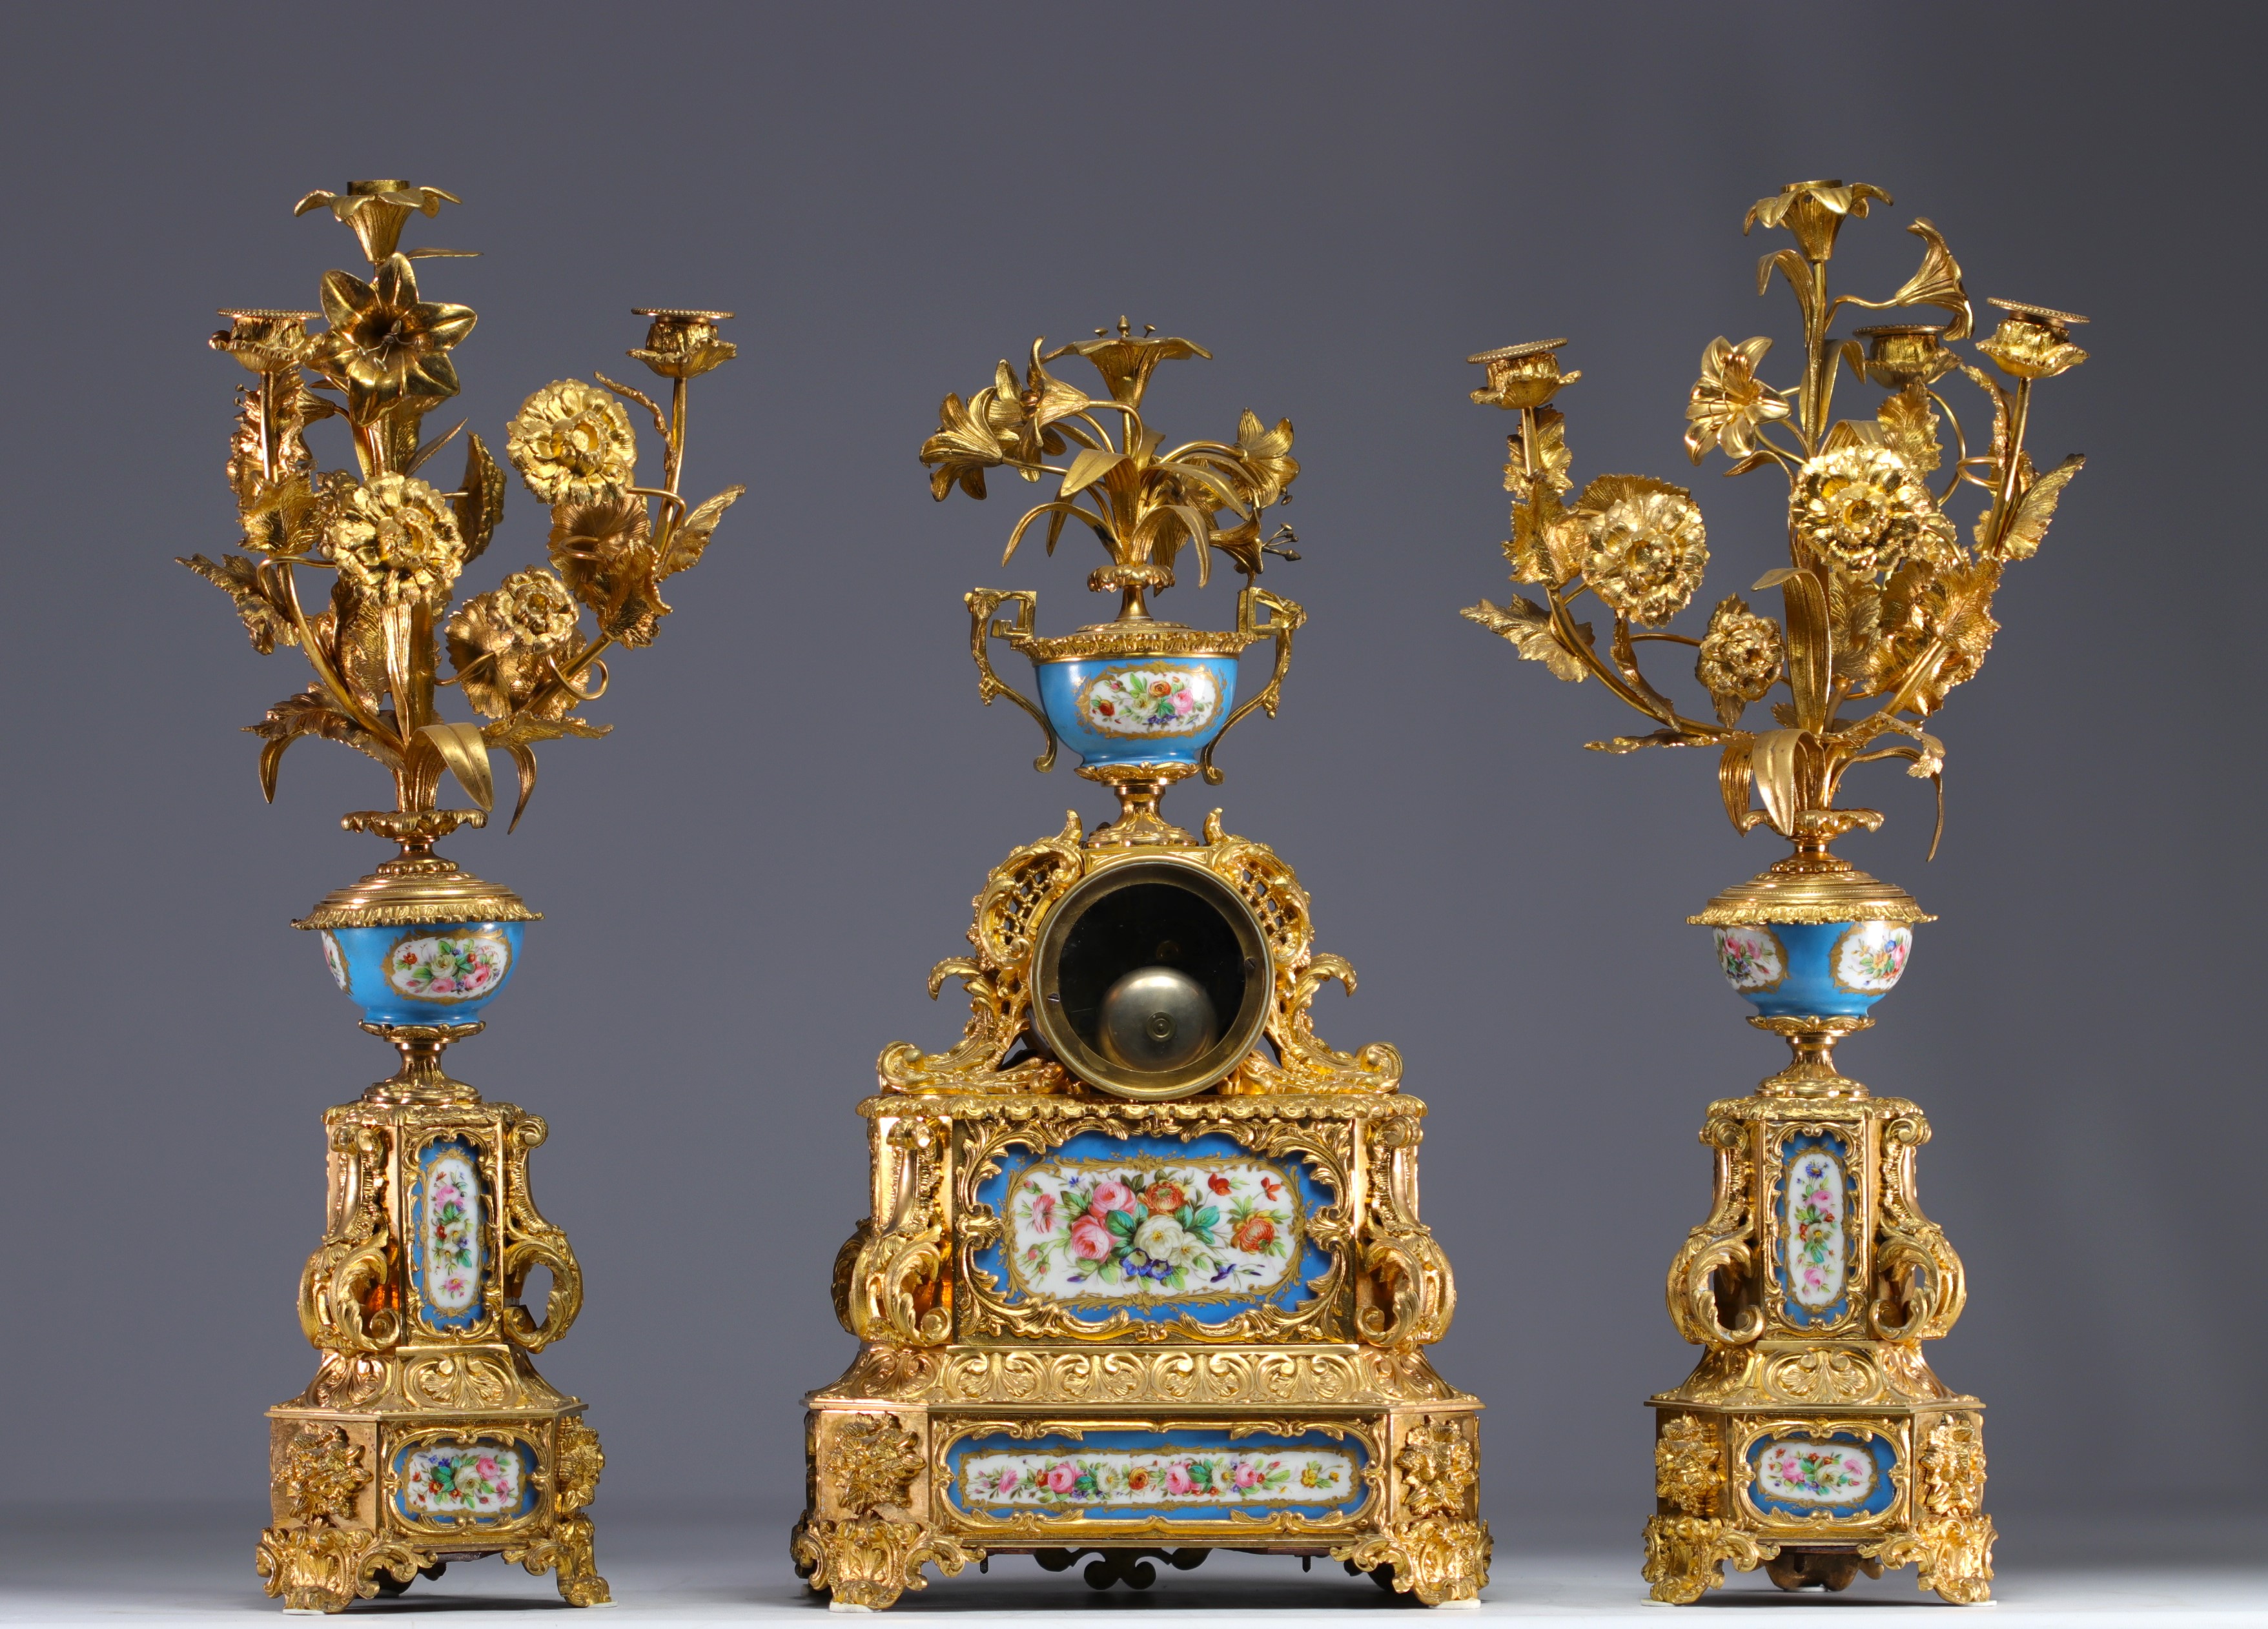 Imposing Sevres porcelain and gilded bronze mantelpiece. - Image 3 of 3